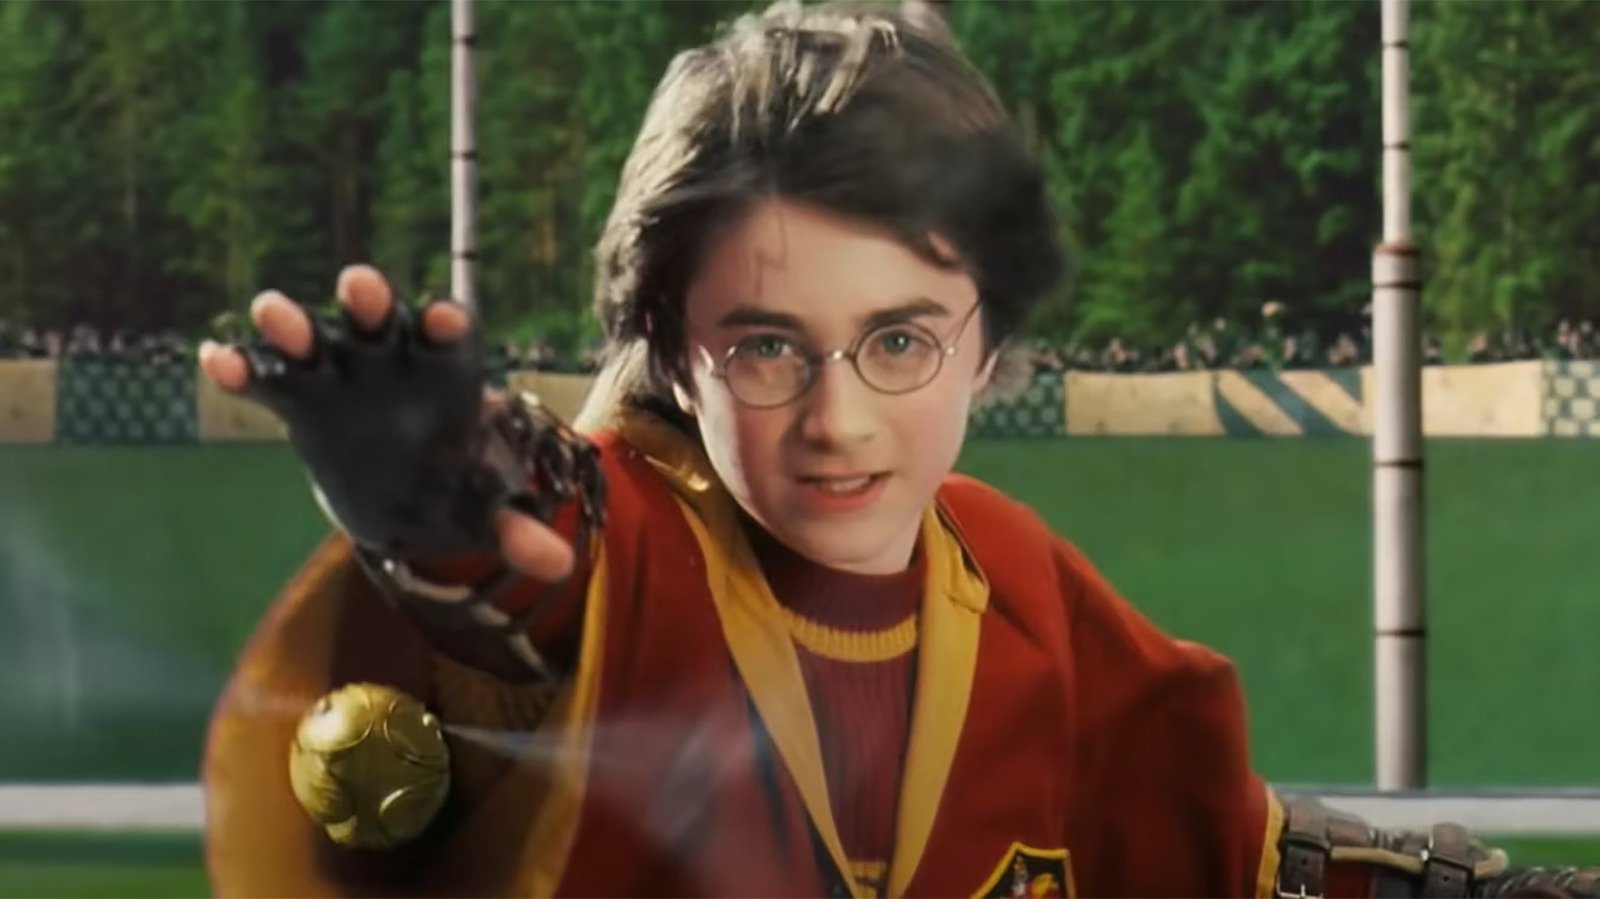 Harry Potter Took An NFL Approach To Filming The First Quidditch Match